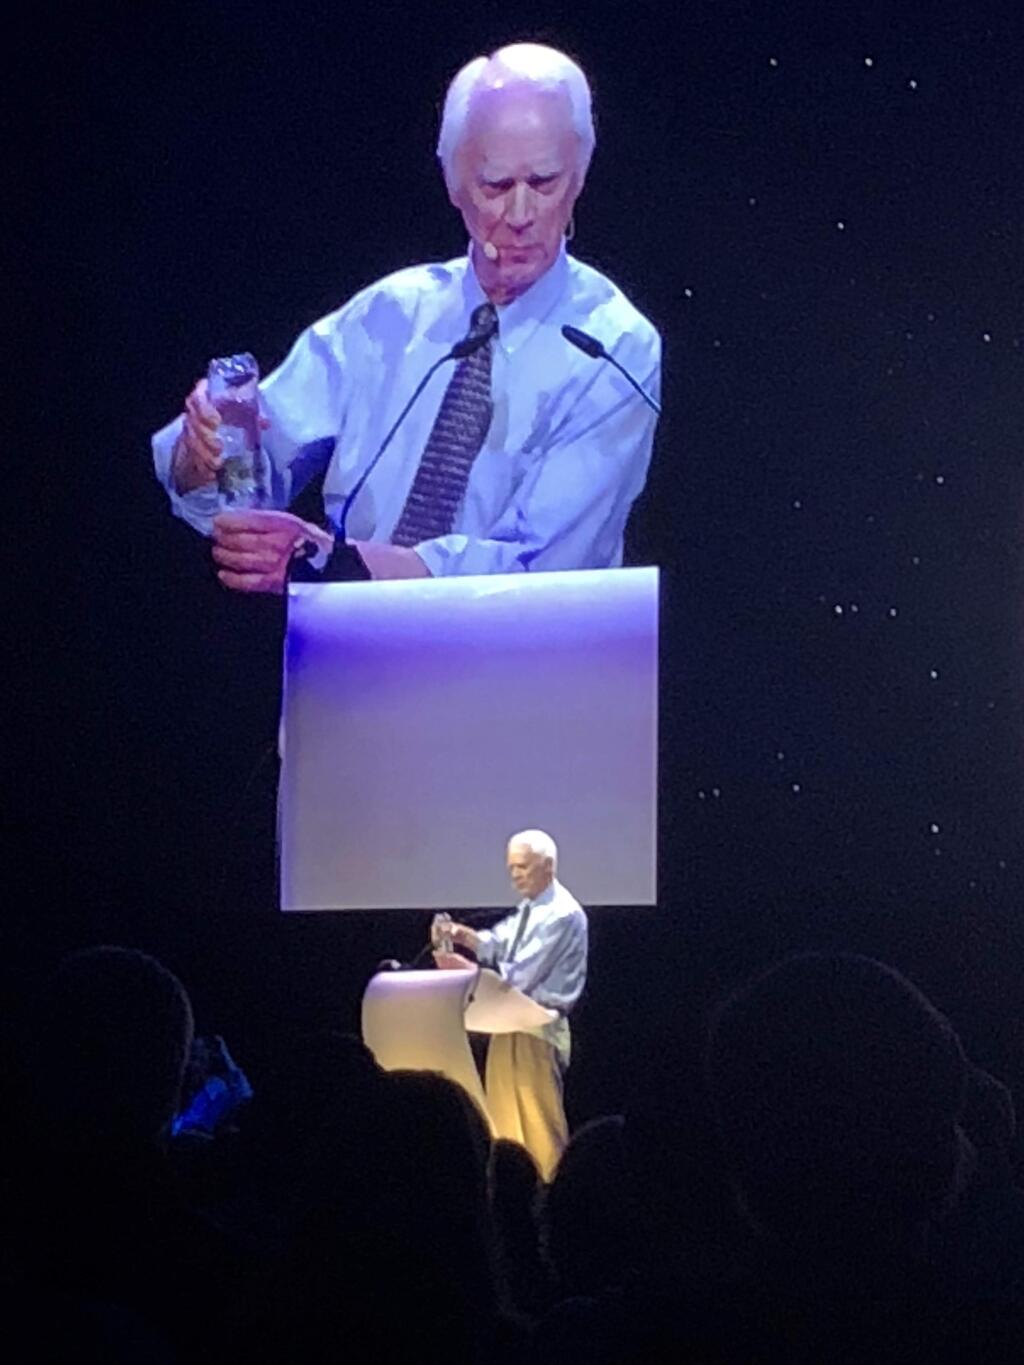 Former NASA Apollo astronaut Rusty Schweickart, showin recently in Zurich last week while making a presentation. Schweickart, who lives in Sonoma, finds himself in high global demand in the run-up to the 50th anniversary of the first moon landing on July 20. The 83-year-old research scientist and MIT-trained aeronautical engineer, flew aboard Apollo 9 in 1969, the first manned flight test of the lunar module, just ahead of Apollo 11, which landed on the Moon that July. (Brian Eno)